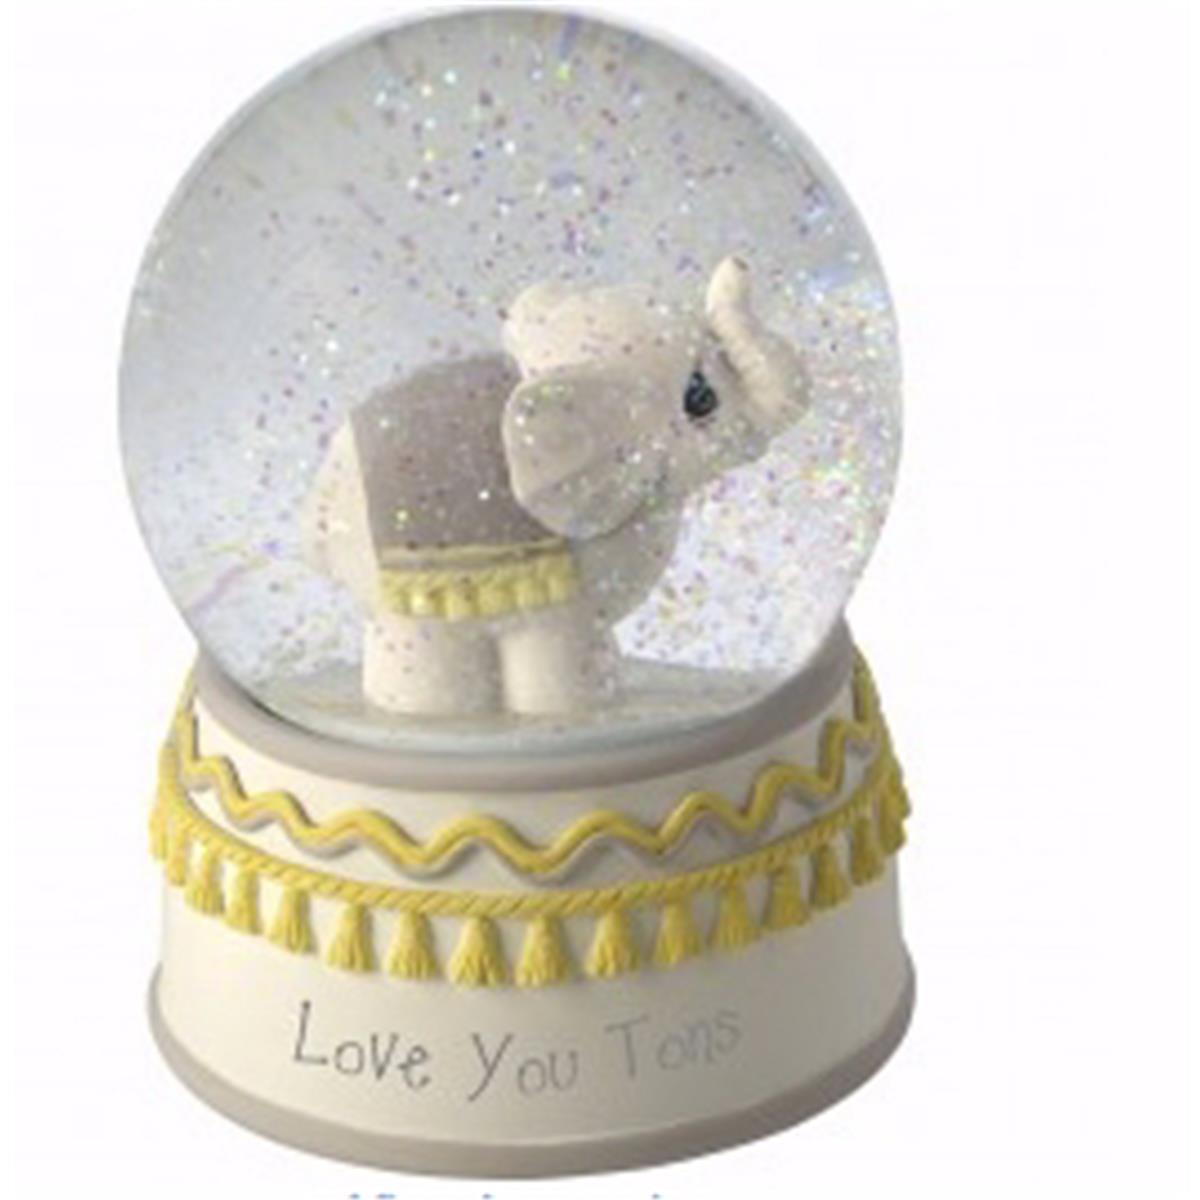 Precious Moments 164085 Musical Elephant-Love You Tons Snow Globe - 6 in.